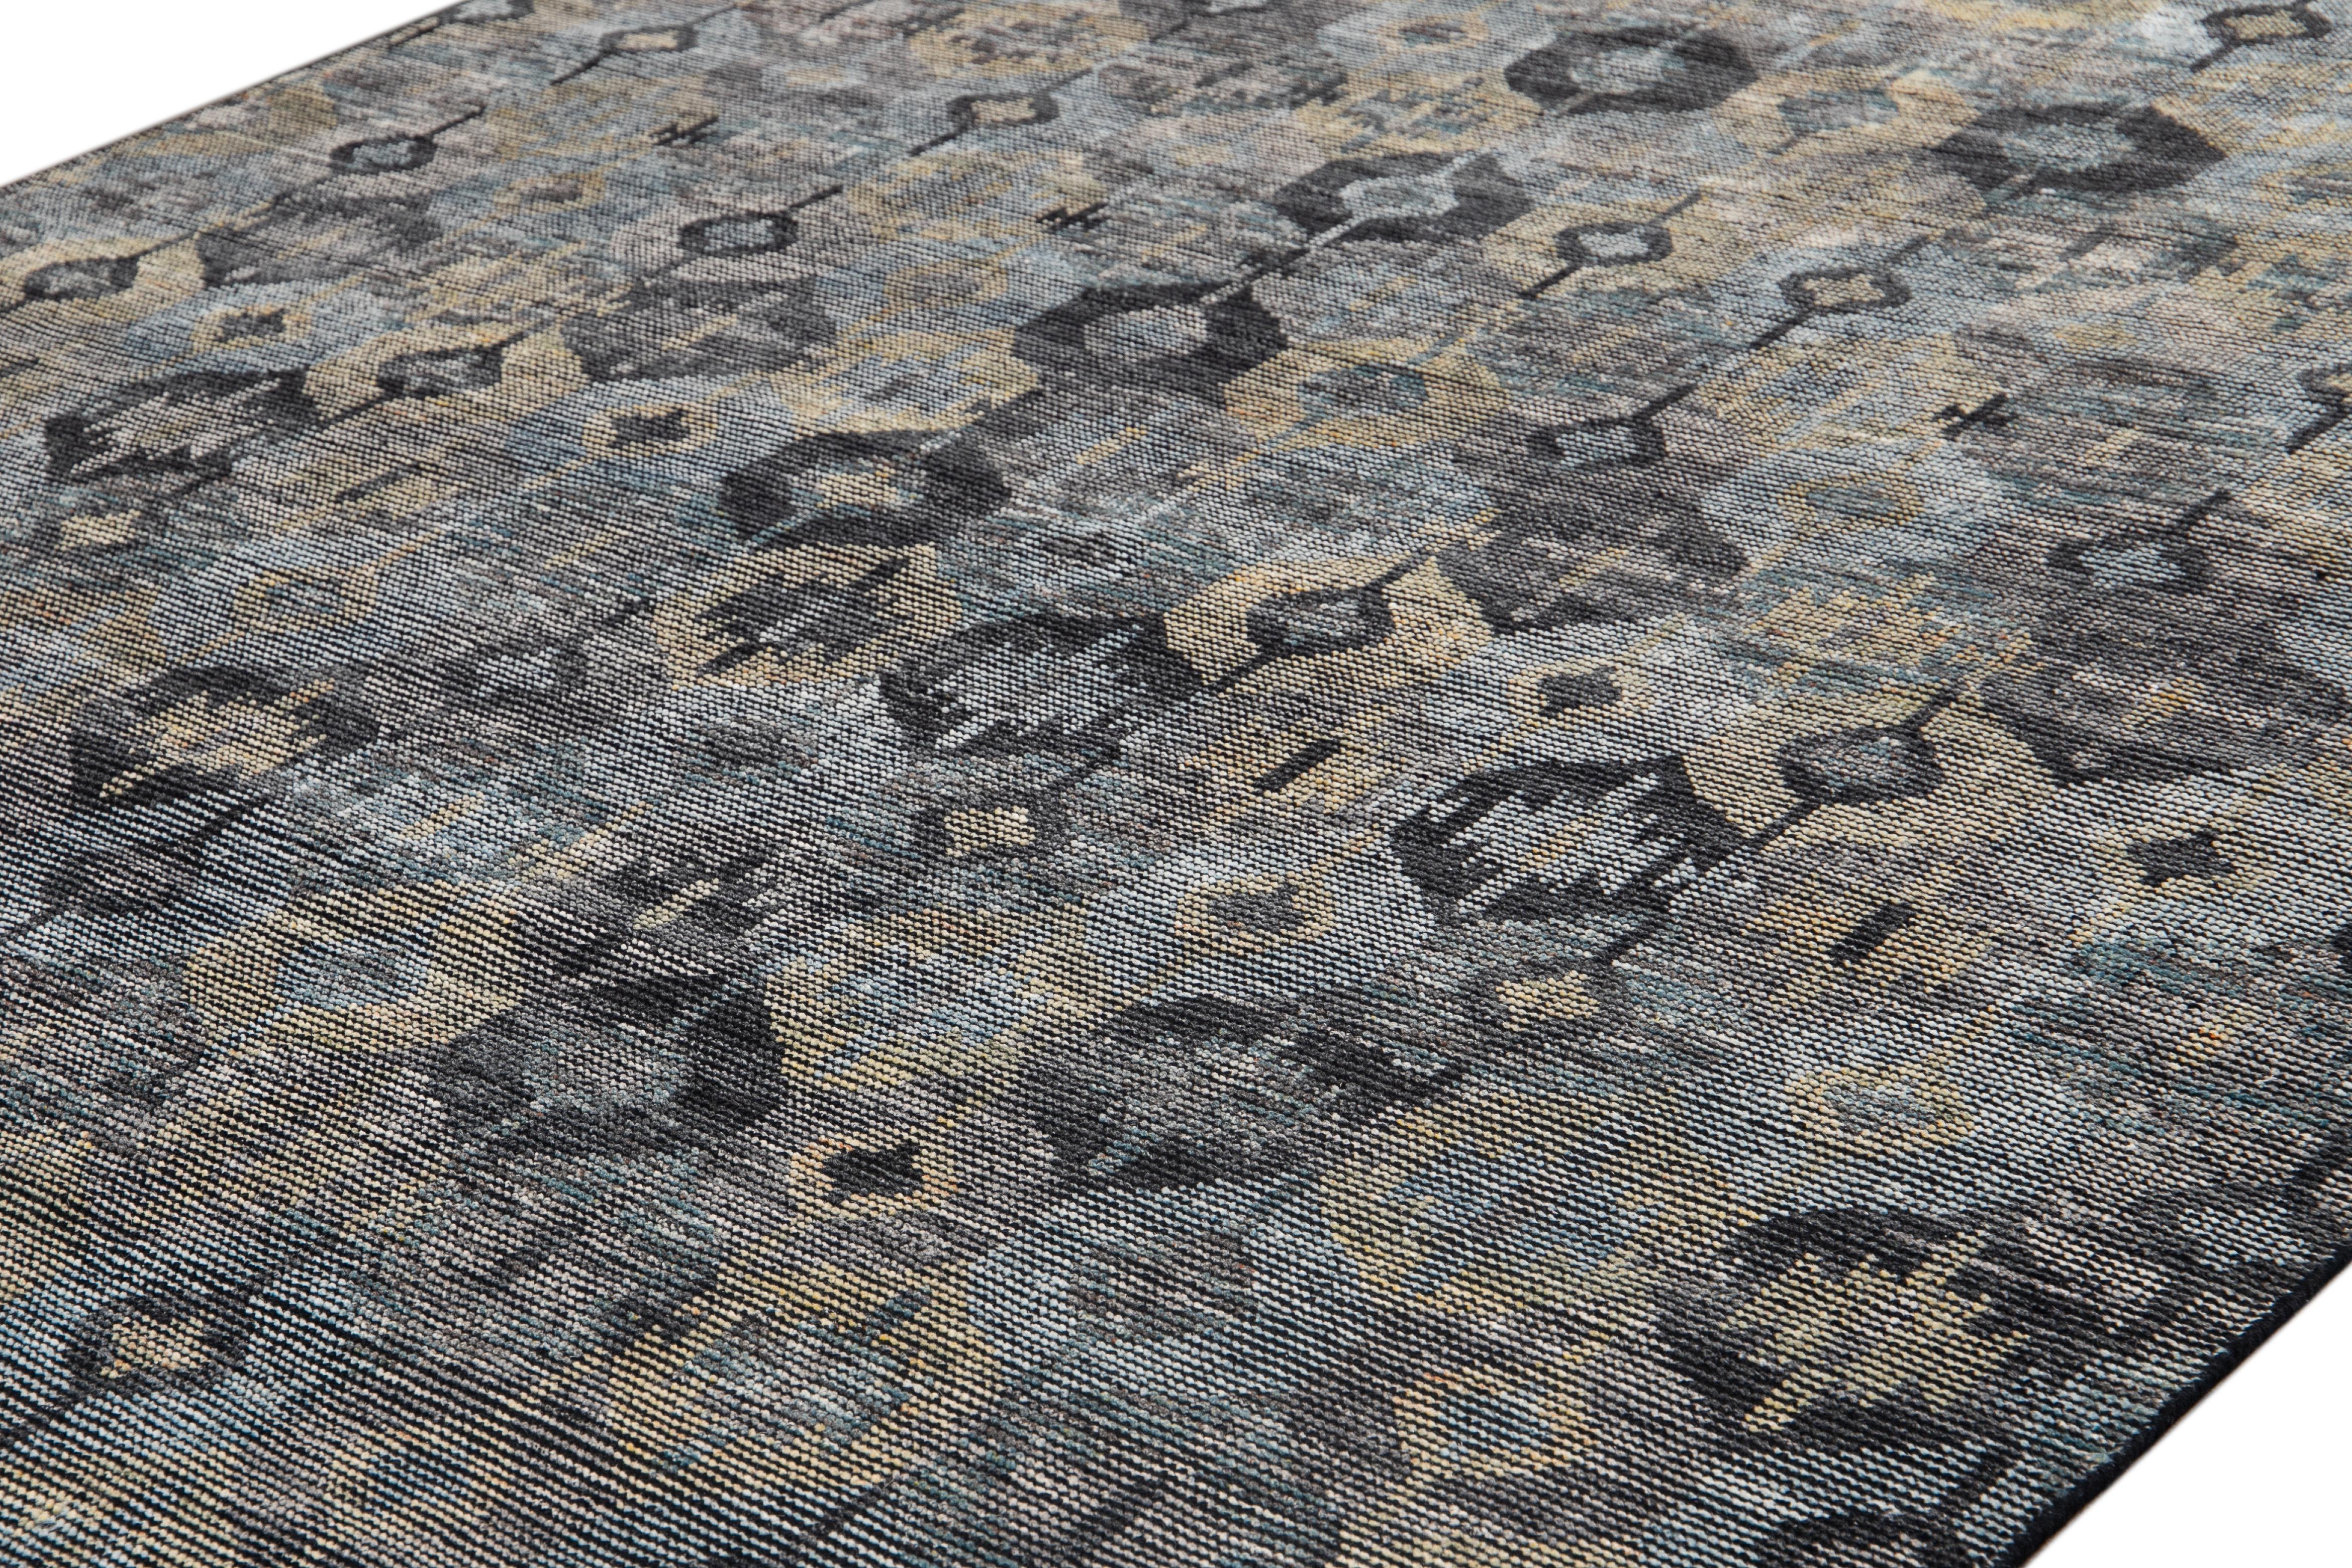 Beautiful Modern Soumak Style Distressed Indian Rug, hand-knotted wool with a gray field, dark yellow and blue accents in a geometric all-over design.

This rug measures: 8' 3